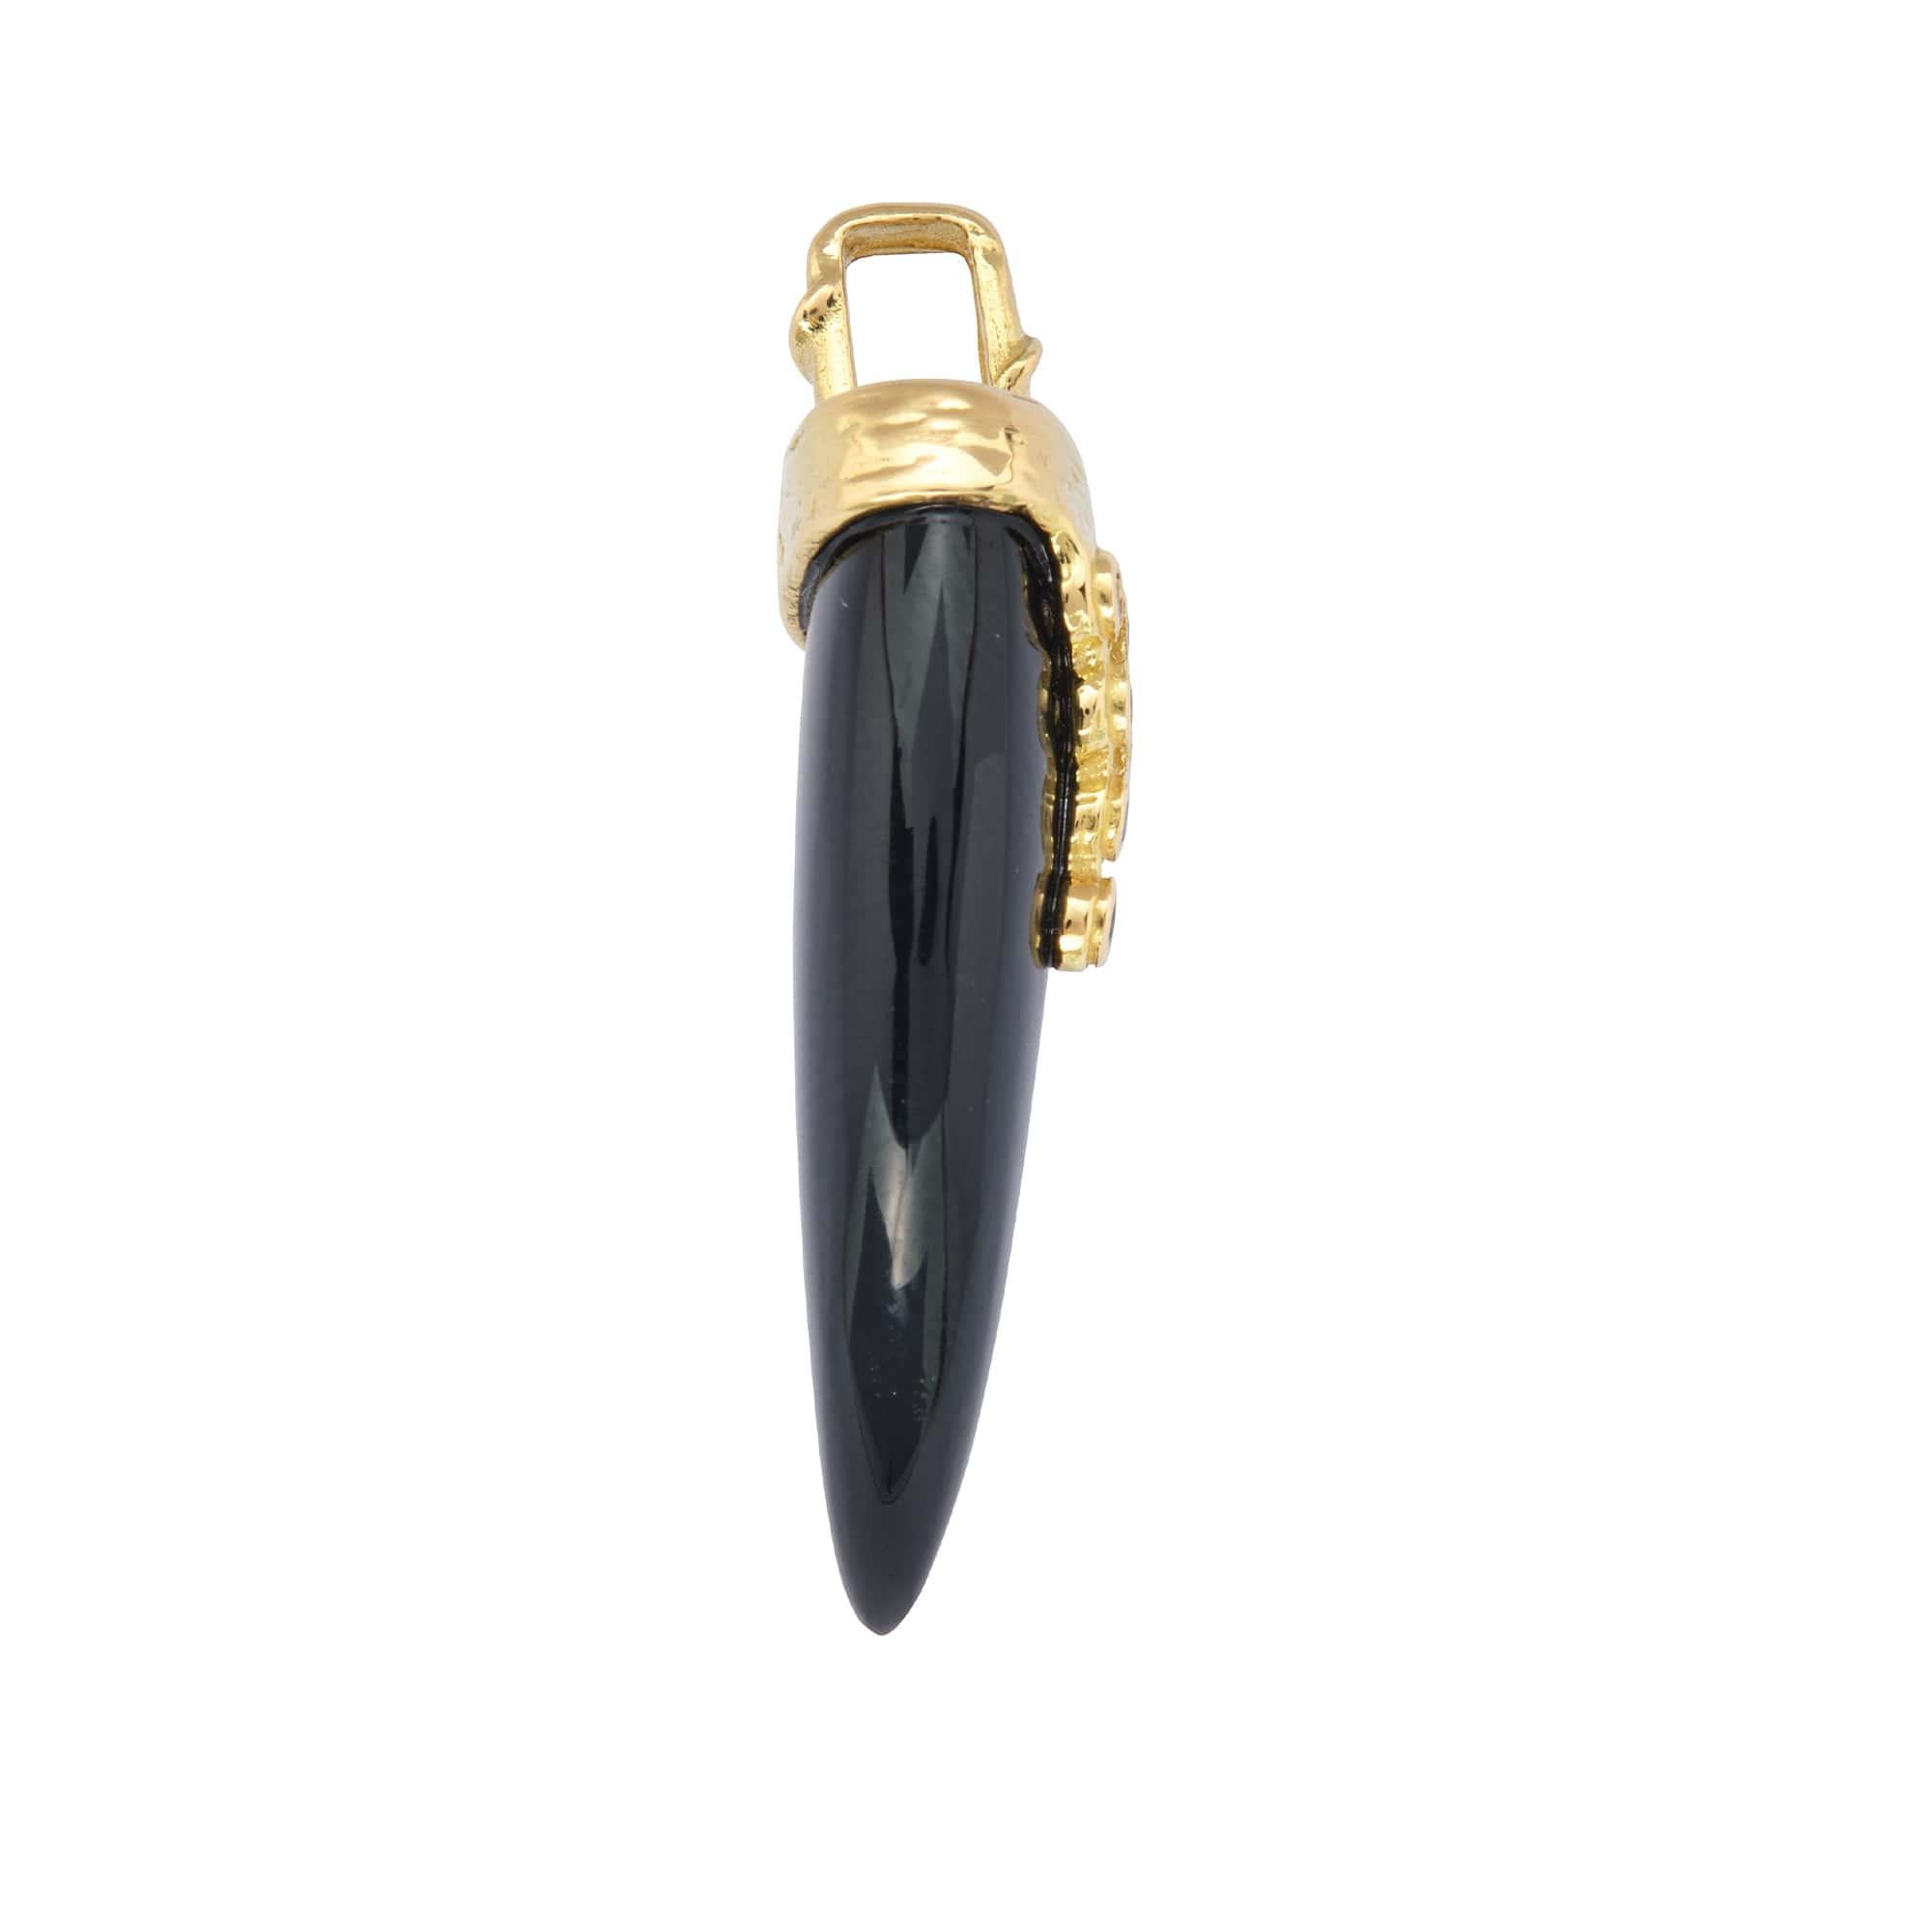 This amulet designed to attract good luck and prosperity is one of our most enduring and sought-after pendant charms. A weathered 14k yellow gold cap has 5 colorless and 2 black diamonds bezel-set to gracefully drip down the front of a carved black